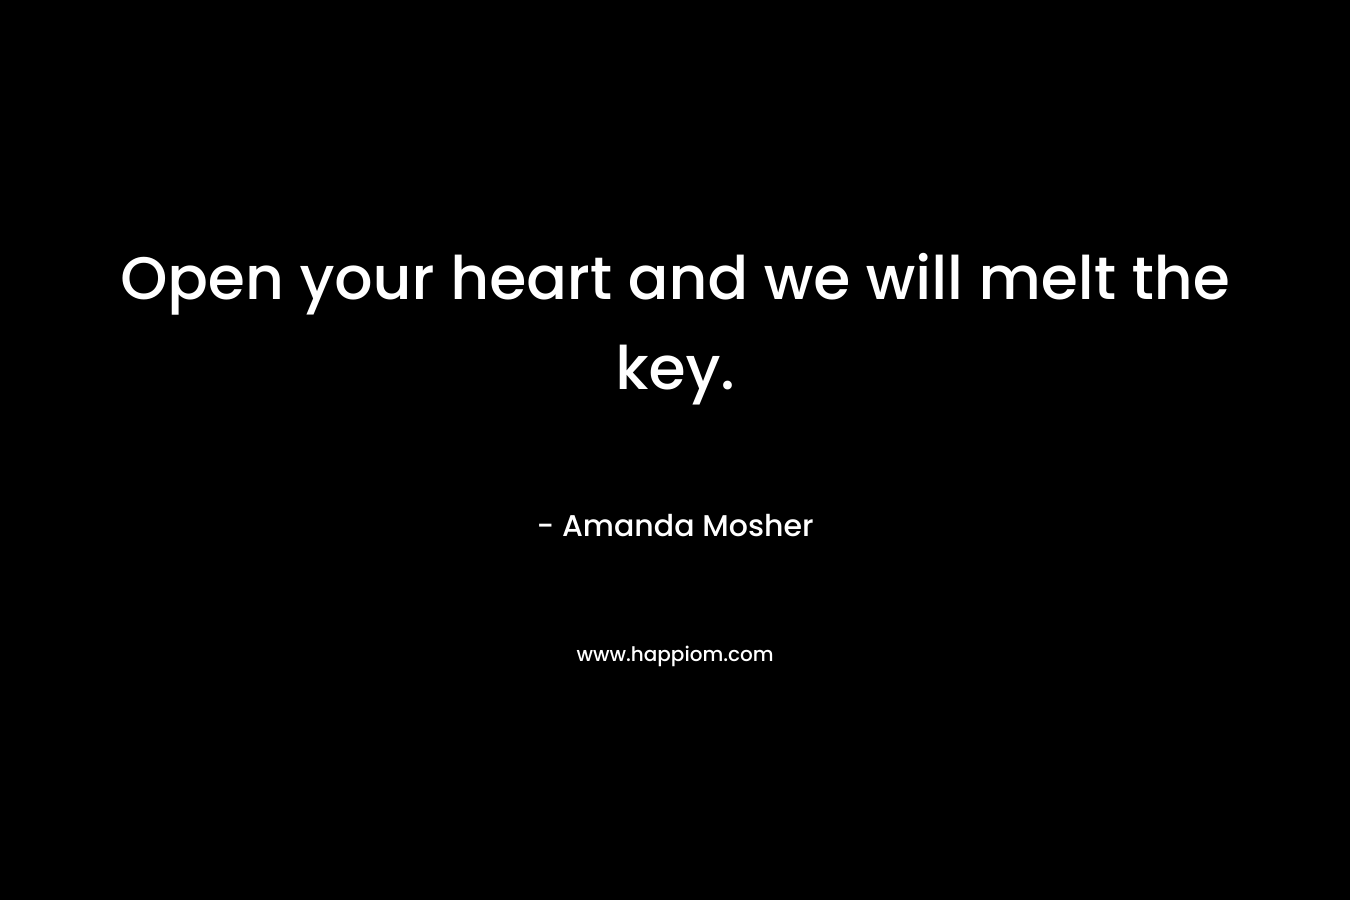 Open your heart and we will melt the key.